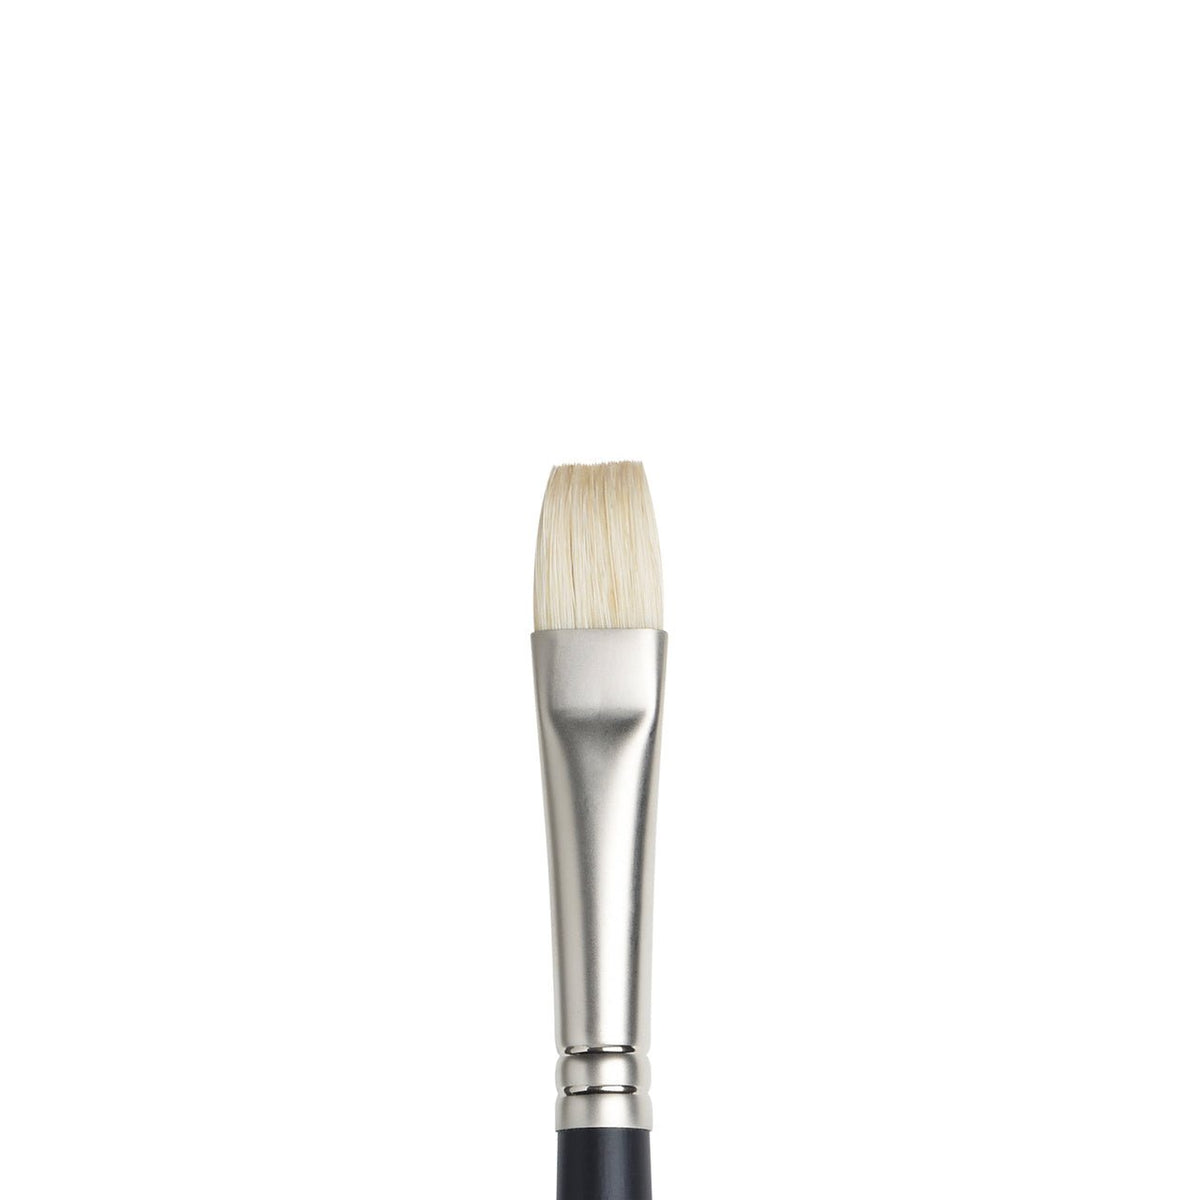 Winsor and Newton Artists' Oil Brushes 8 Bright - 8856629